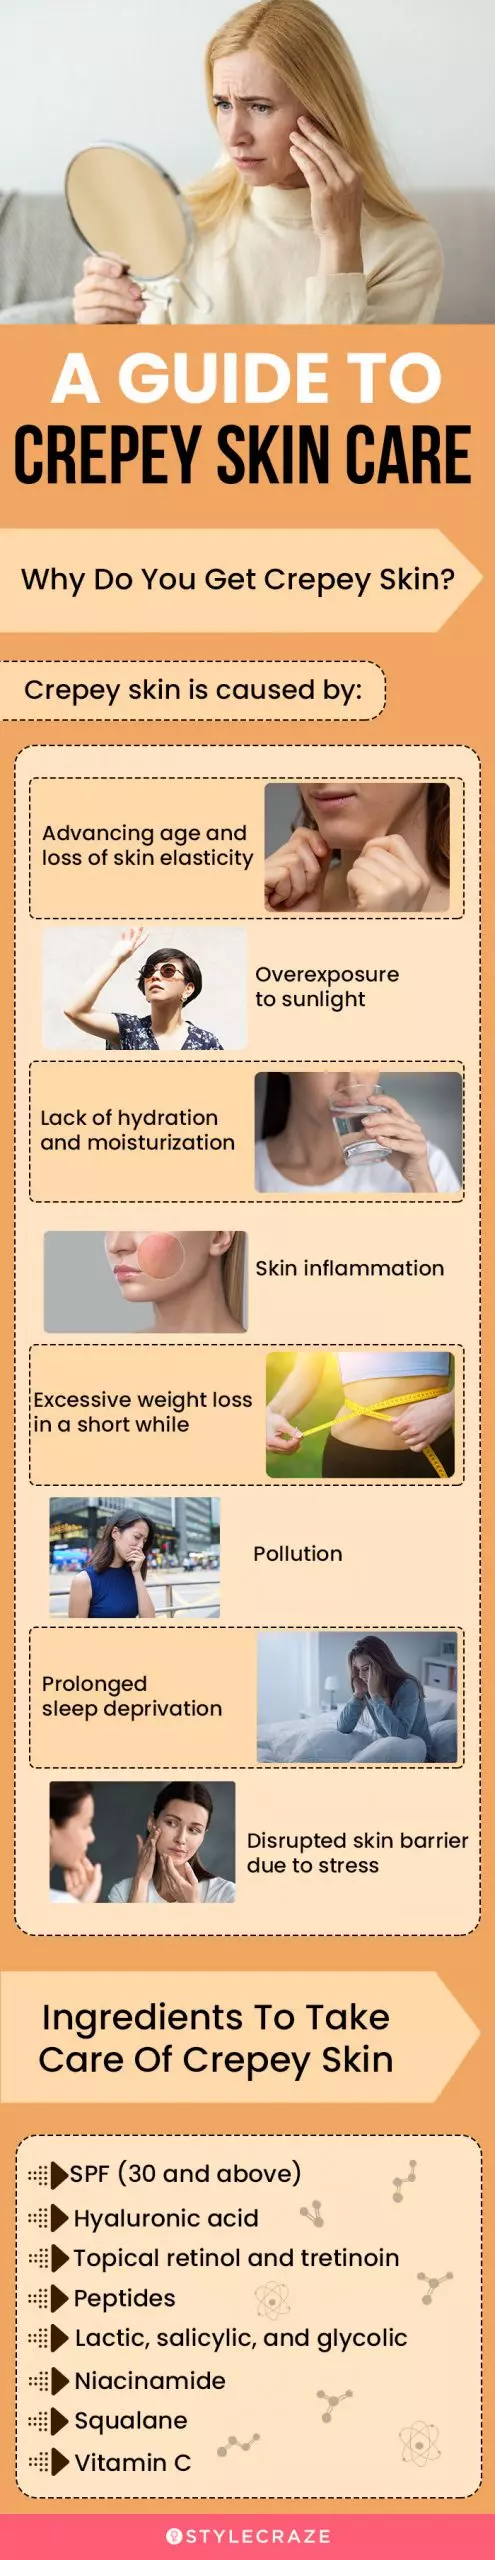 A Guide To Crepey Skin Care (infographic)